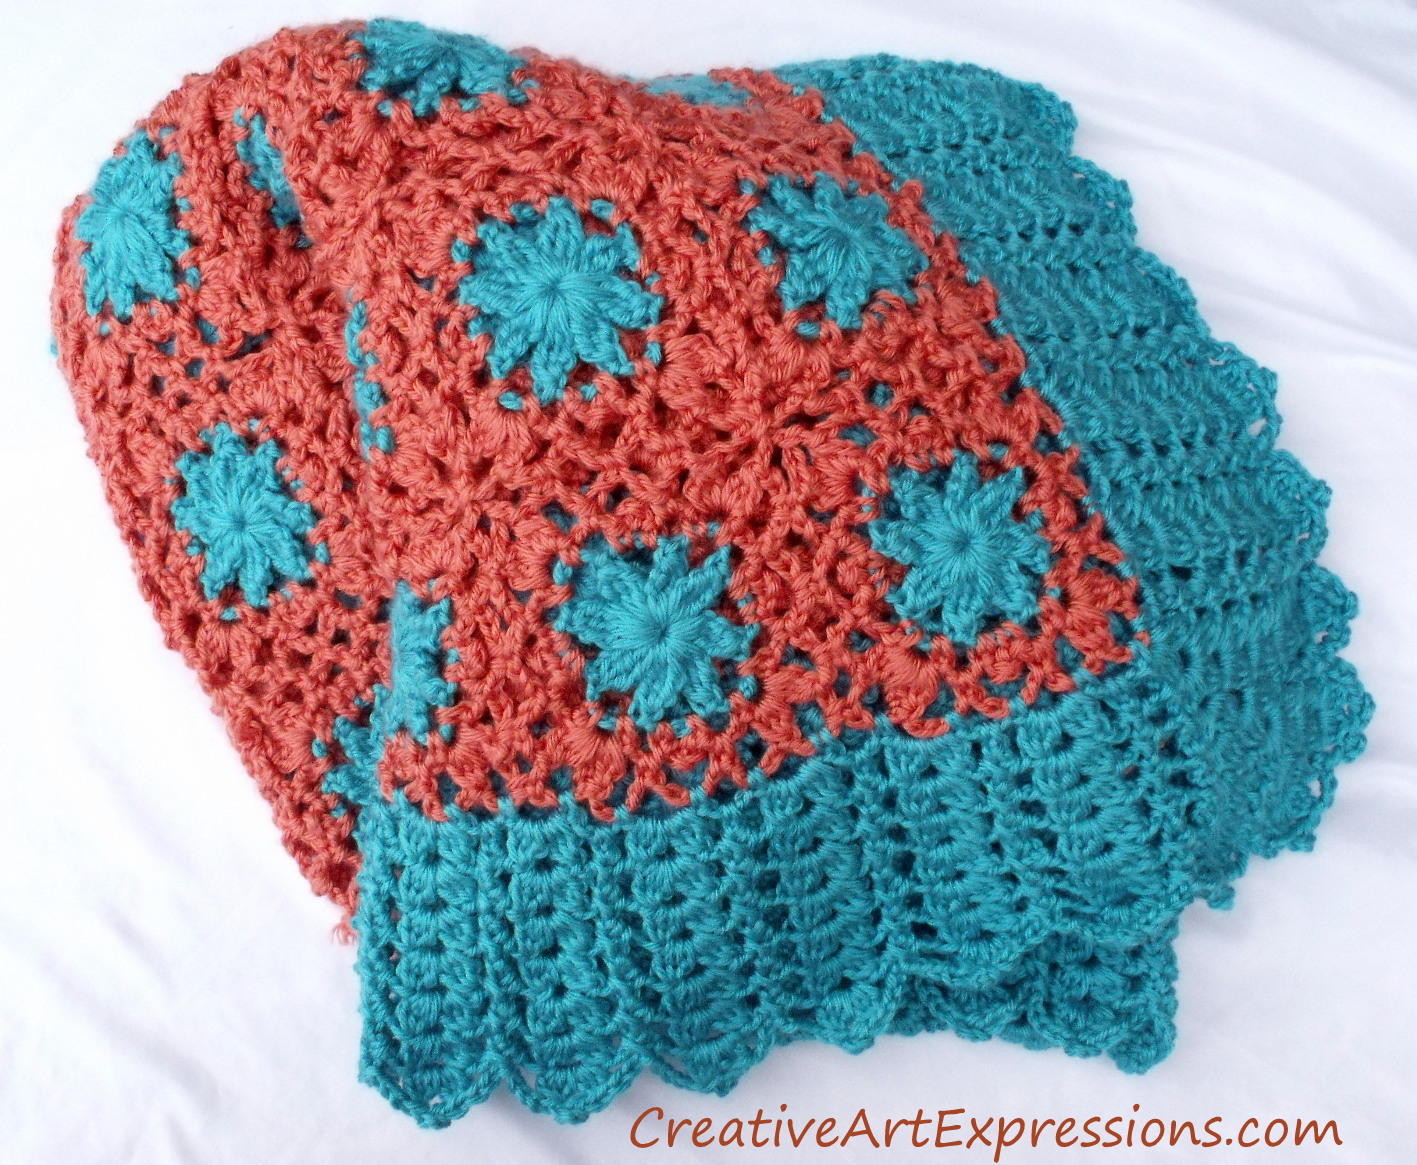 Creative Art Expressions Hand Crocheted Tuquoise & Coral Baby Blanket